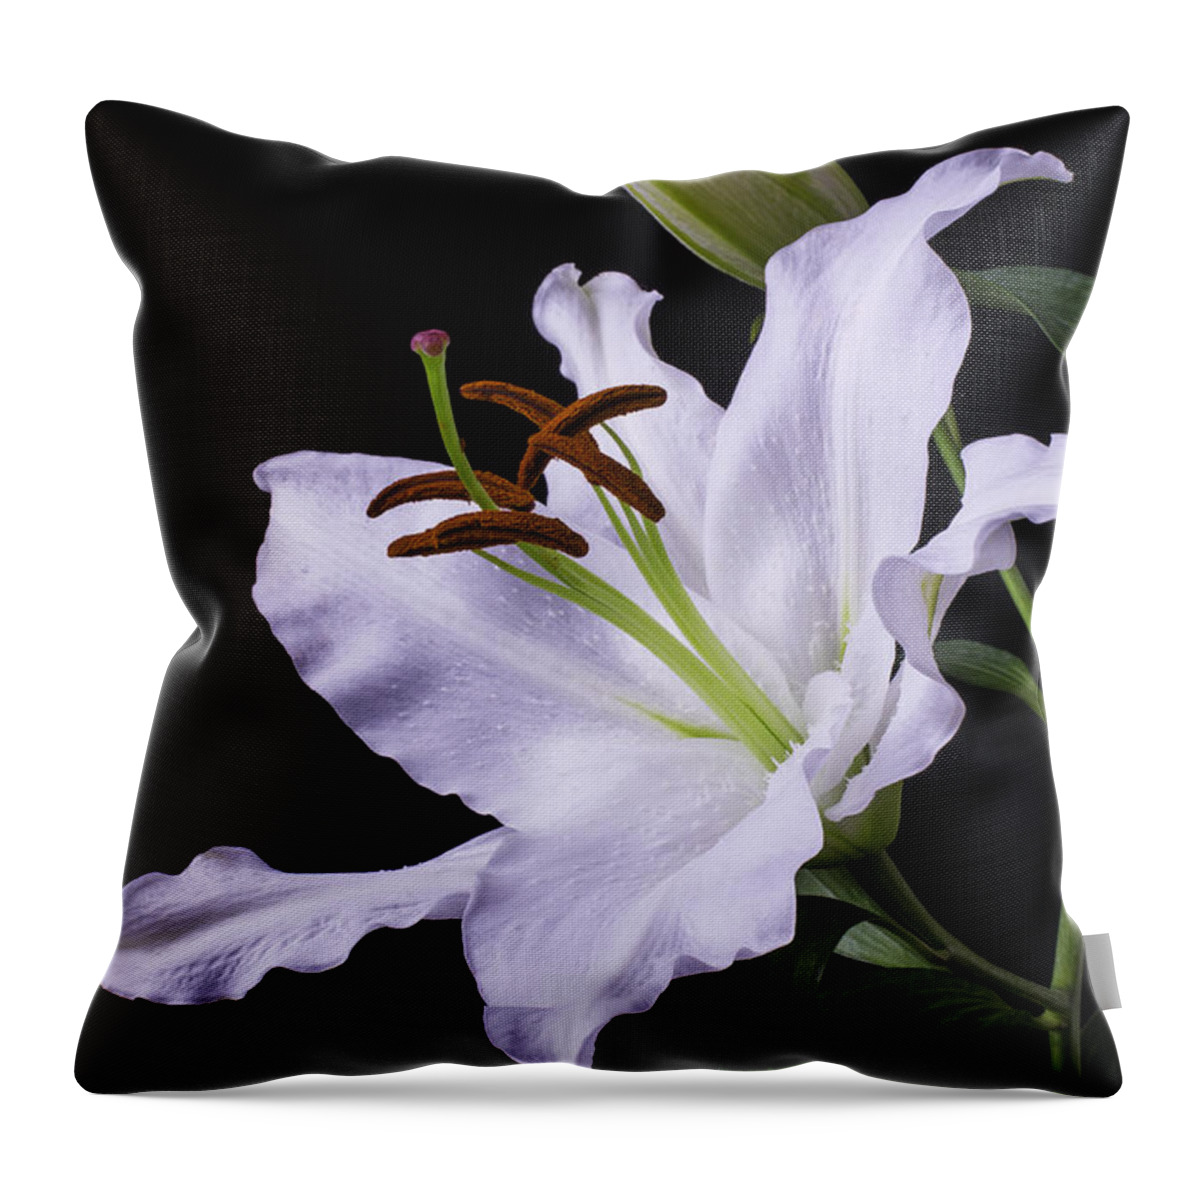 Oriental Lily Throw Pillow featuring the photograph Oriental Lily by Garry Gay